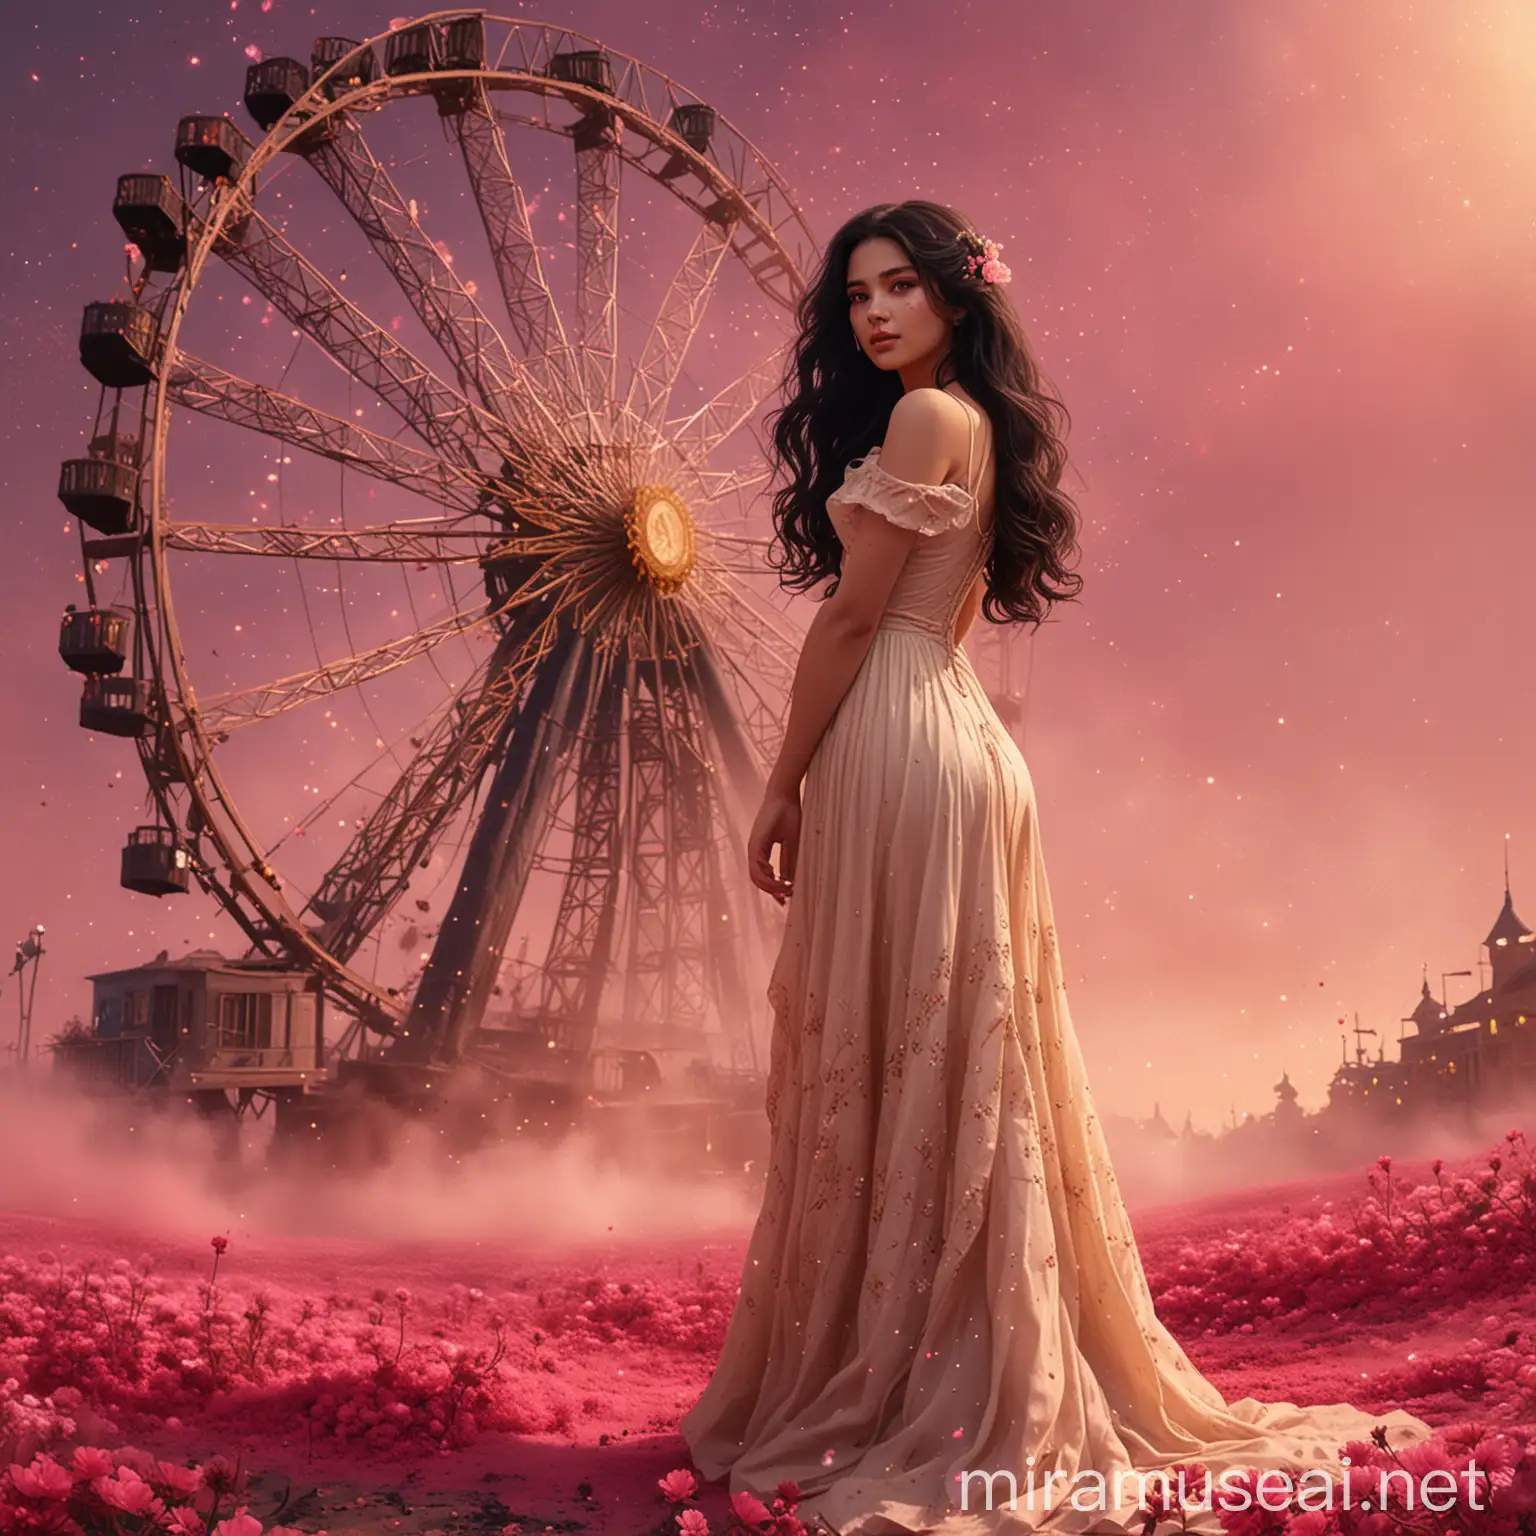 A beautiful woman, standing up on the ground, surrounded by realistic dark pink dust. Long black wavy hair with a flower. Long elegant beige dress. Background golden ferris wheel decorated with flowers. Background golden sparkle. Focus the golden ferris wheel. Fantasy, illustration, digital art, illustration art, fantasy art, digital painting.